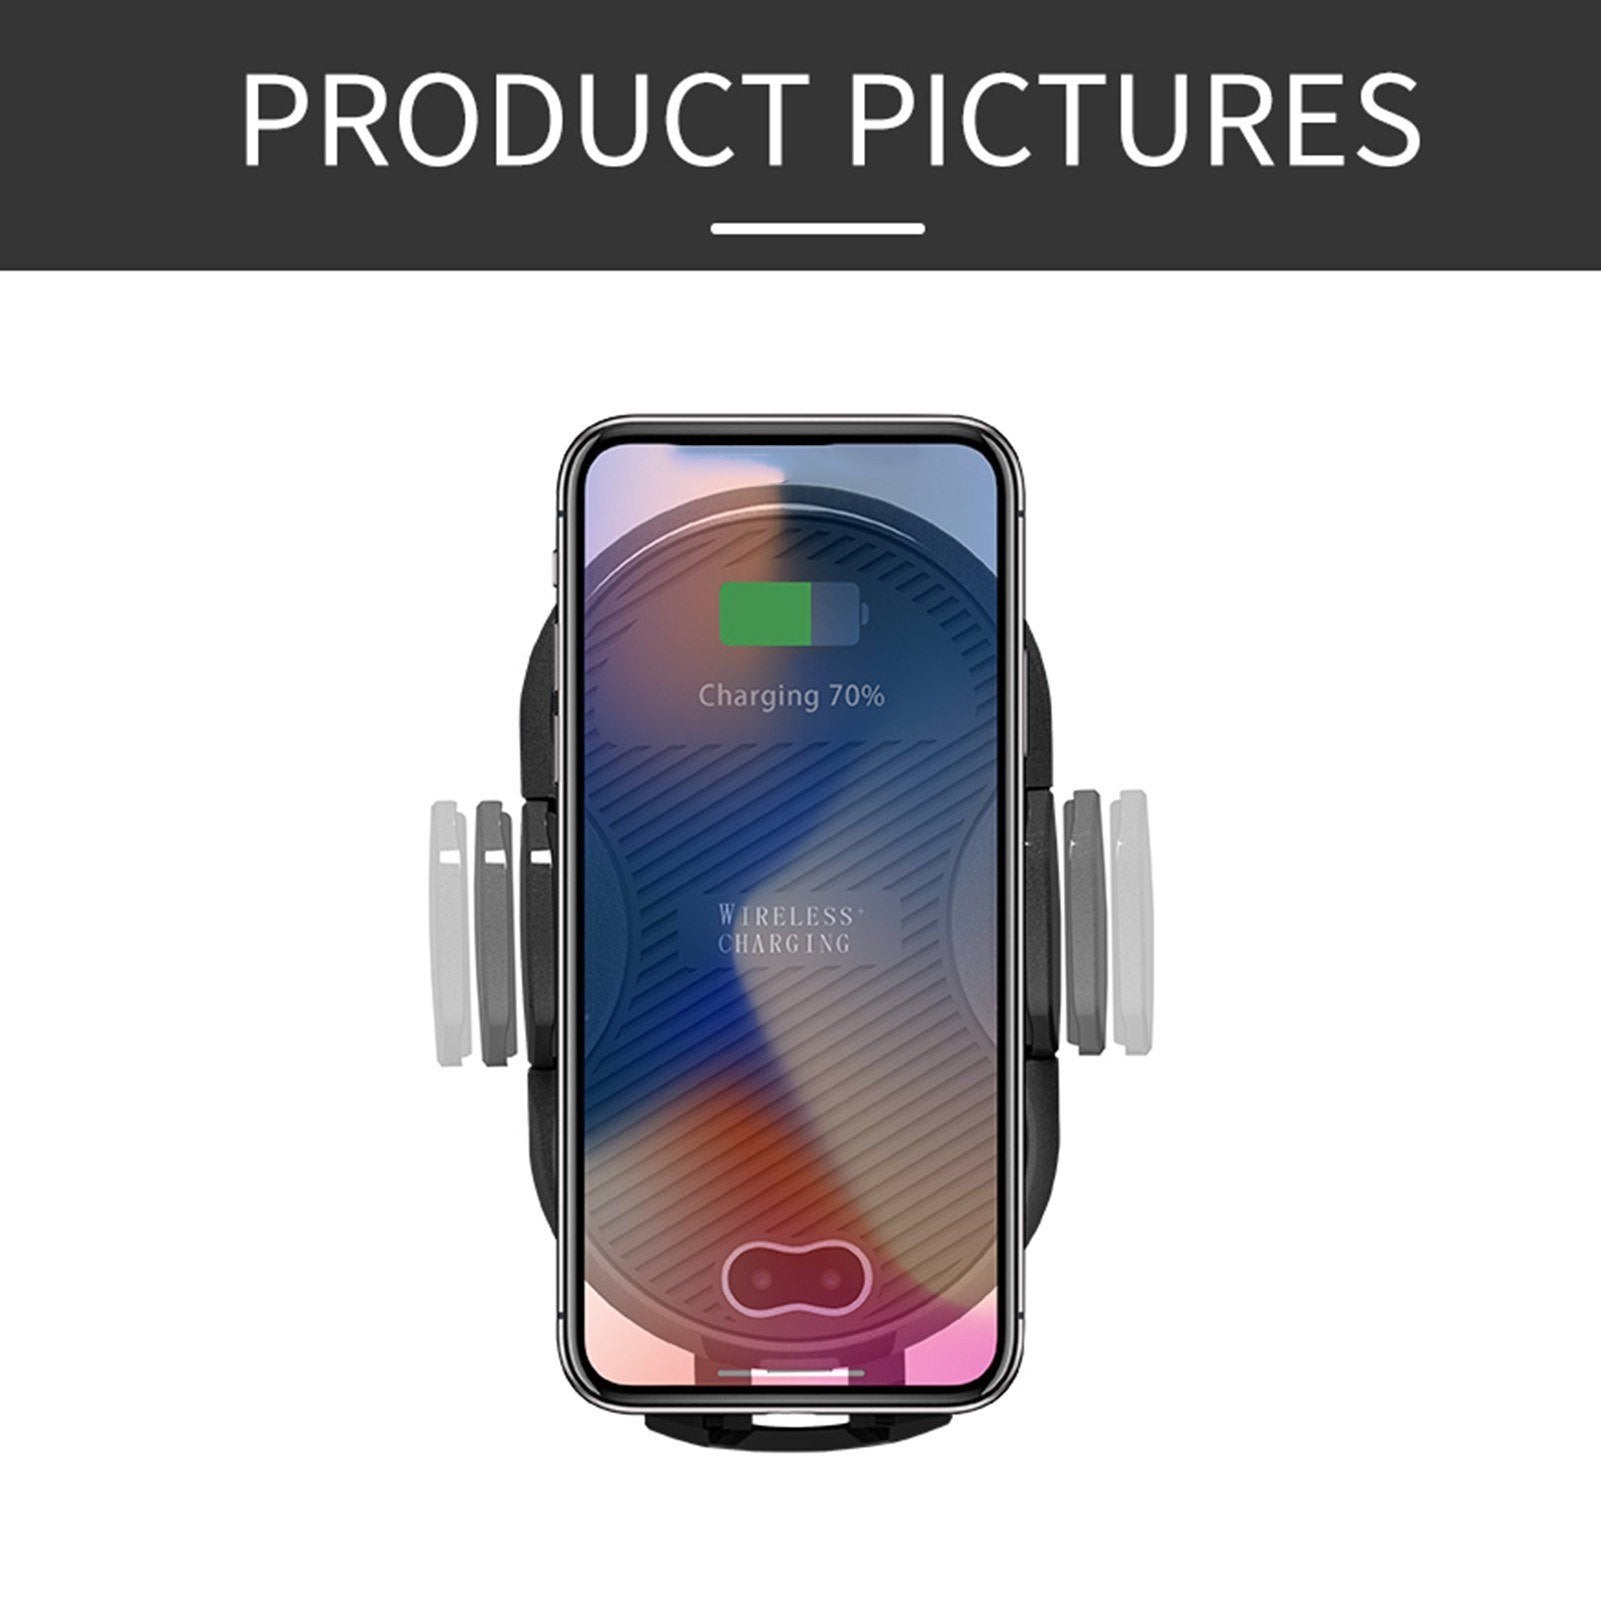 Wireless Charger Car Infrared Sensing Automatic Retractable Clip Fast Charging Compatible for iPhone Xs Max/XR/X/8/8Plus